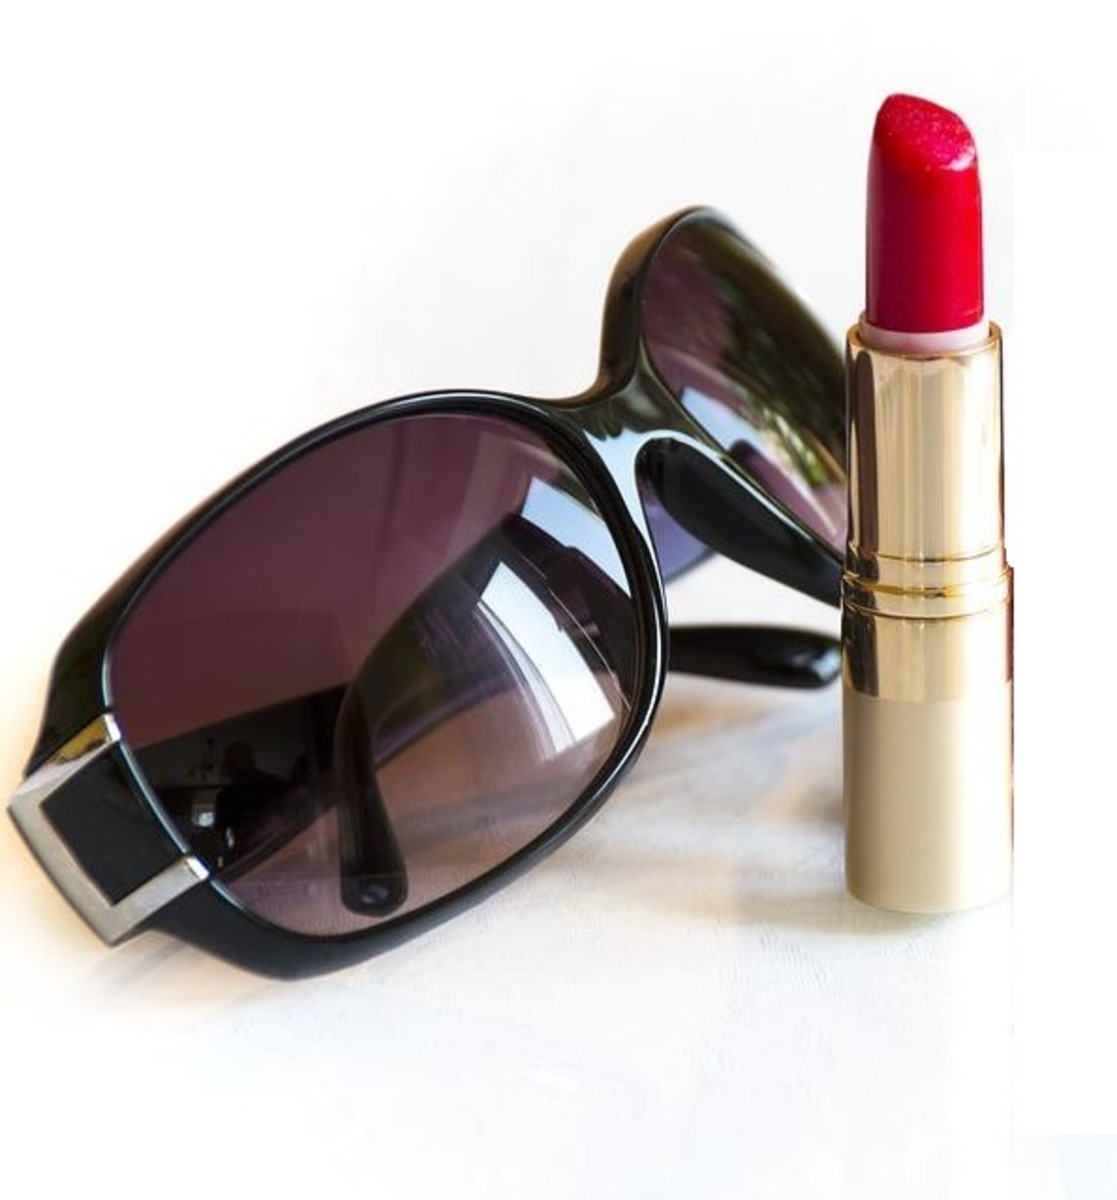 If you're short on time, all you need is a pair of dark glasses and red lipstick and you're out the door in minutes.